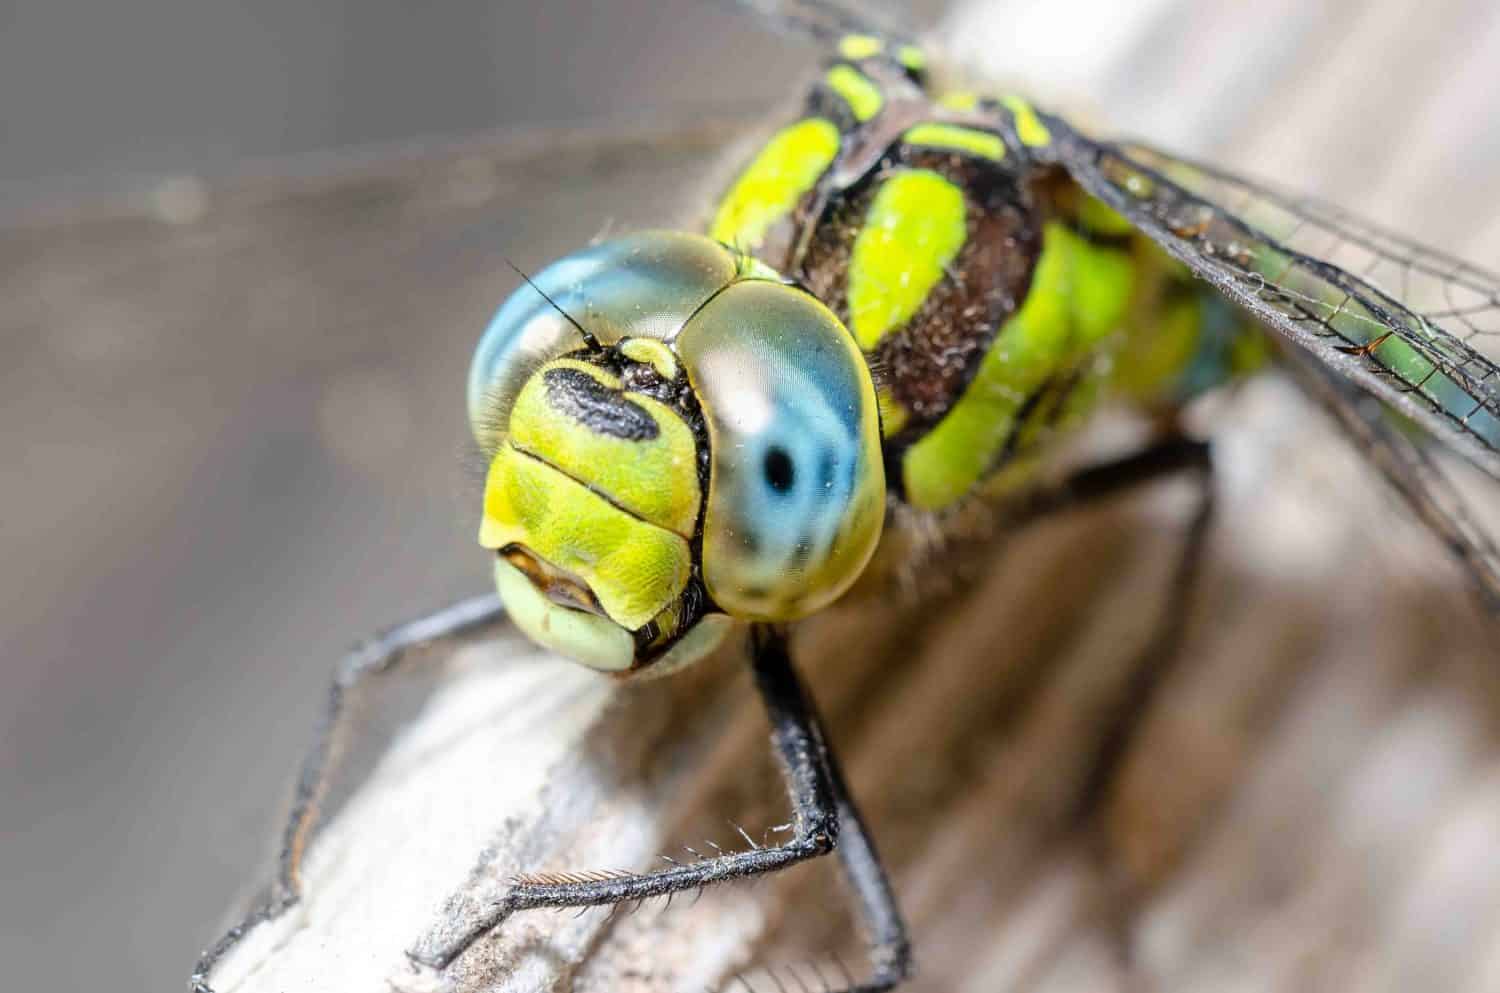 Сlose-up portrait of a dragonfly with big eyes.